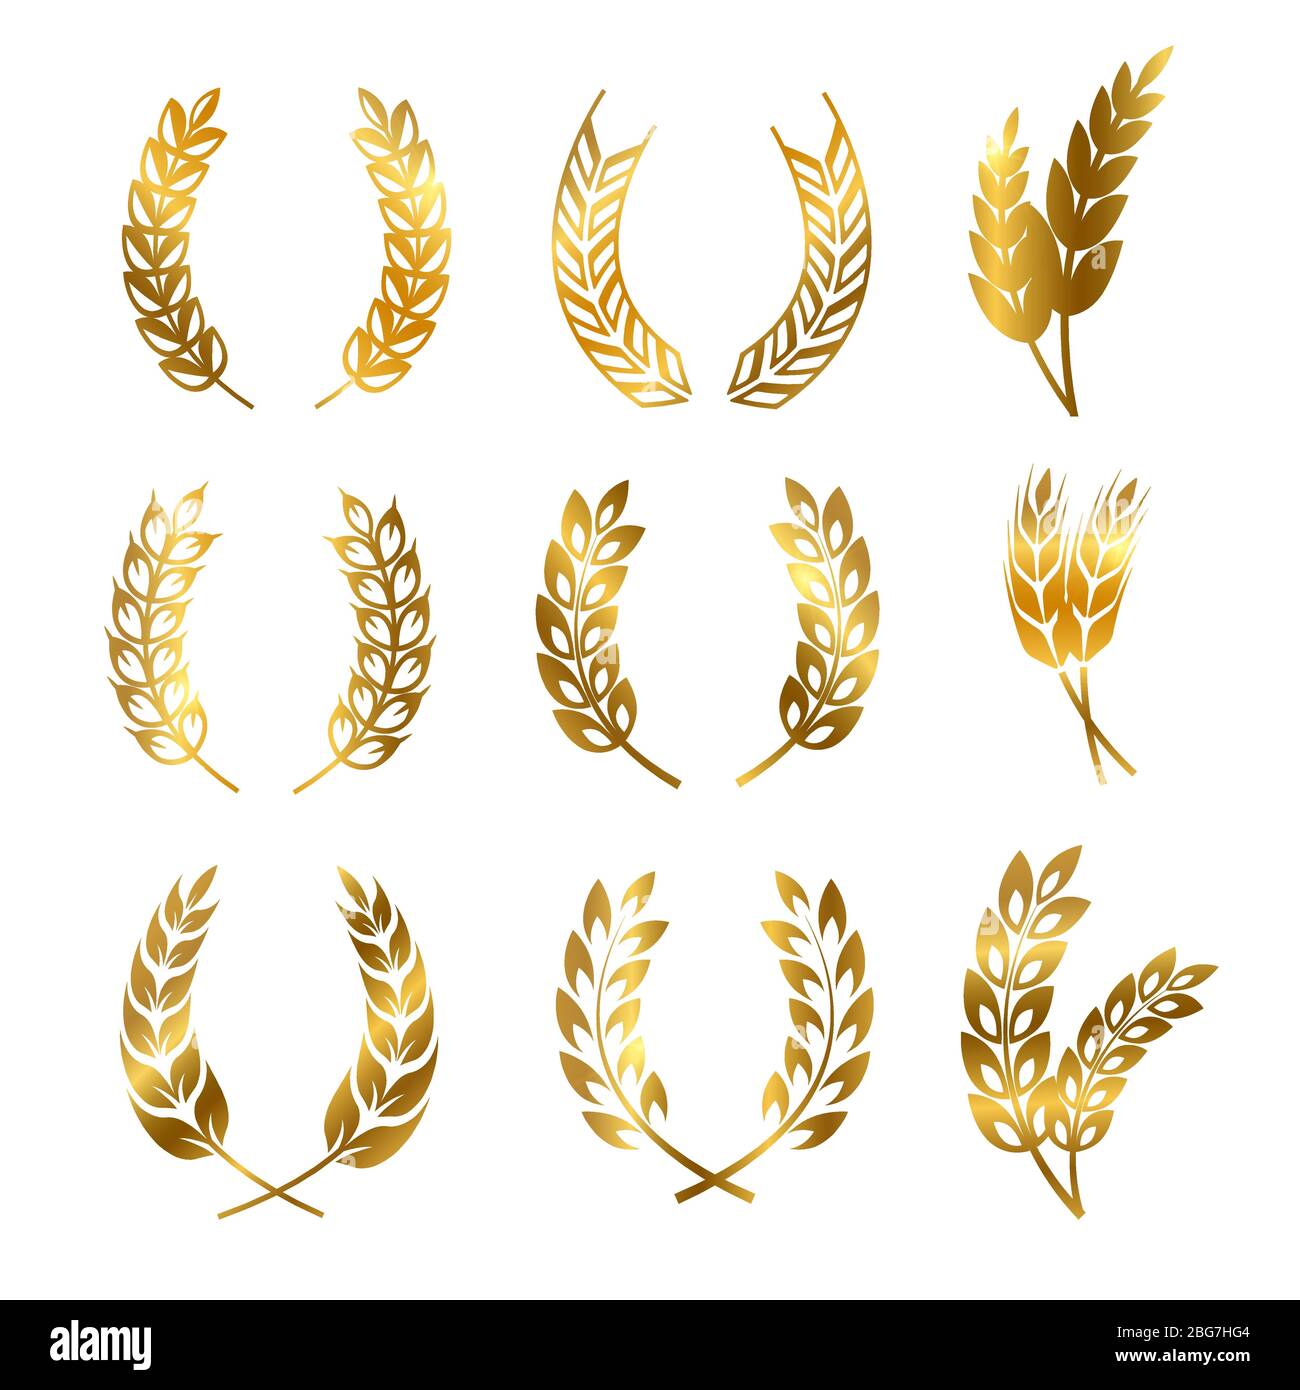 Golden rye wheat ears wreaths of set vector elements for bread and beer labels and logos isolated on white background illustration Stock Vector